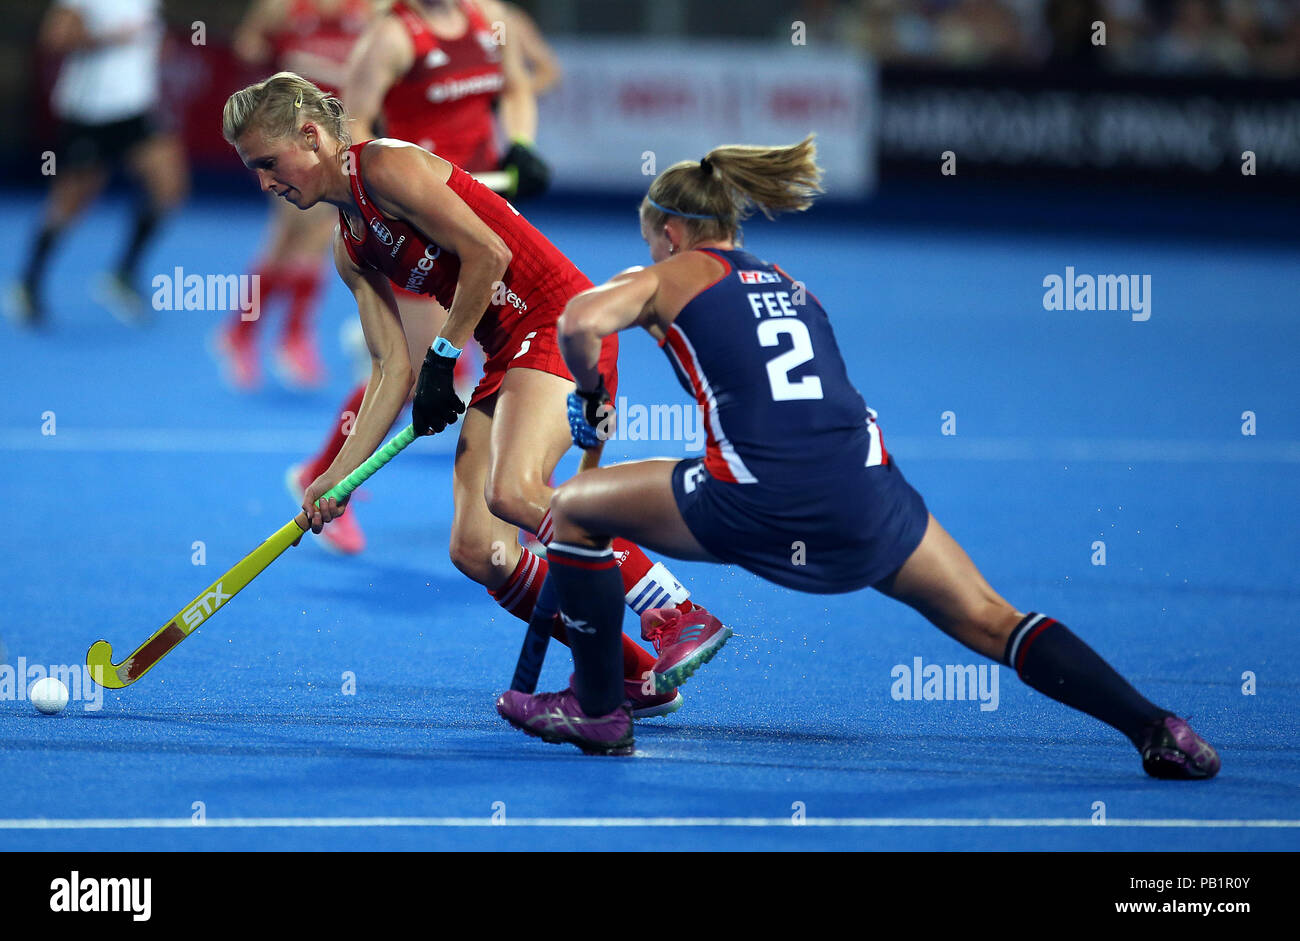 England's Alex Danson in action during the national Vitality Women's Hockey World Cup match at The Lee Valley Hockey and Tennis Centre, London. PRESS ASSOCIATION Photo, Picture date: Wednesday July 25, 2018. Photo credit should read: Steven Paston/PA Wire. Stock Photo